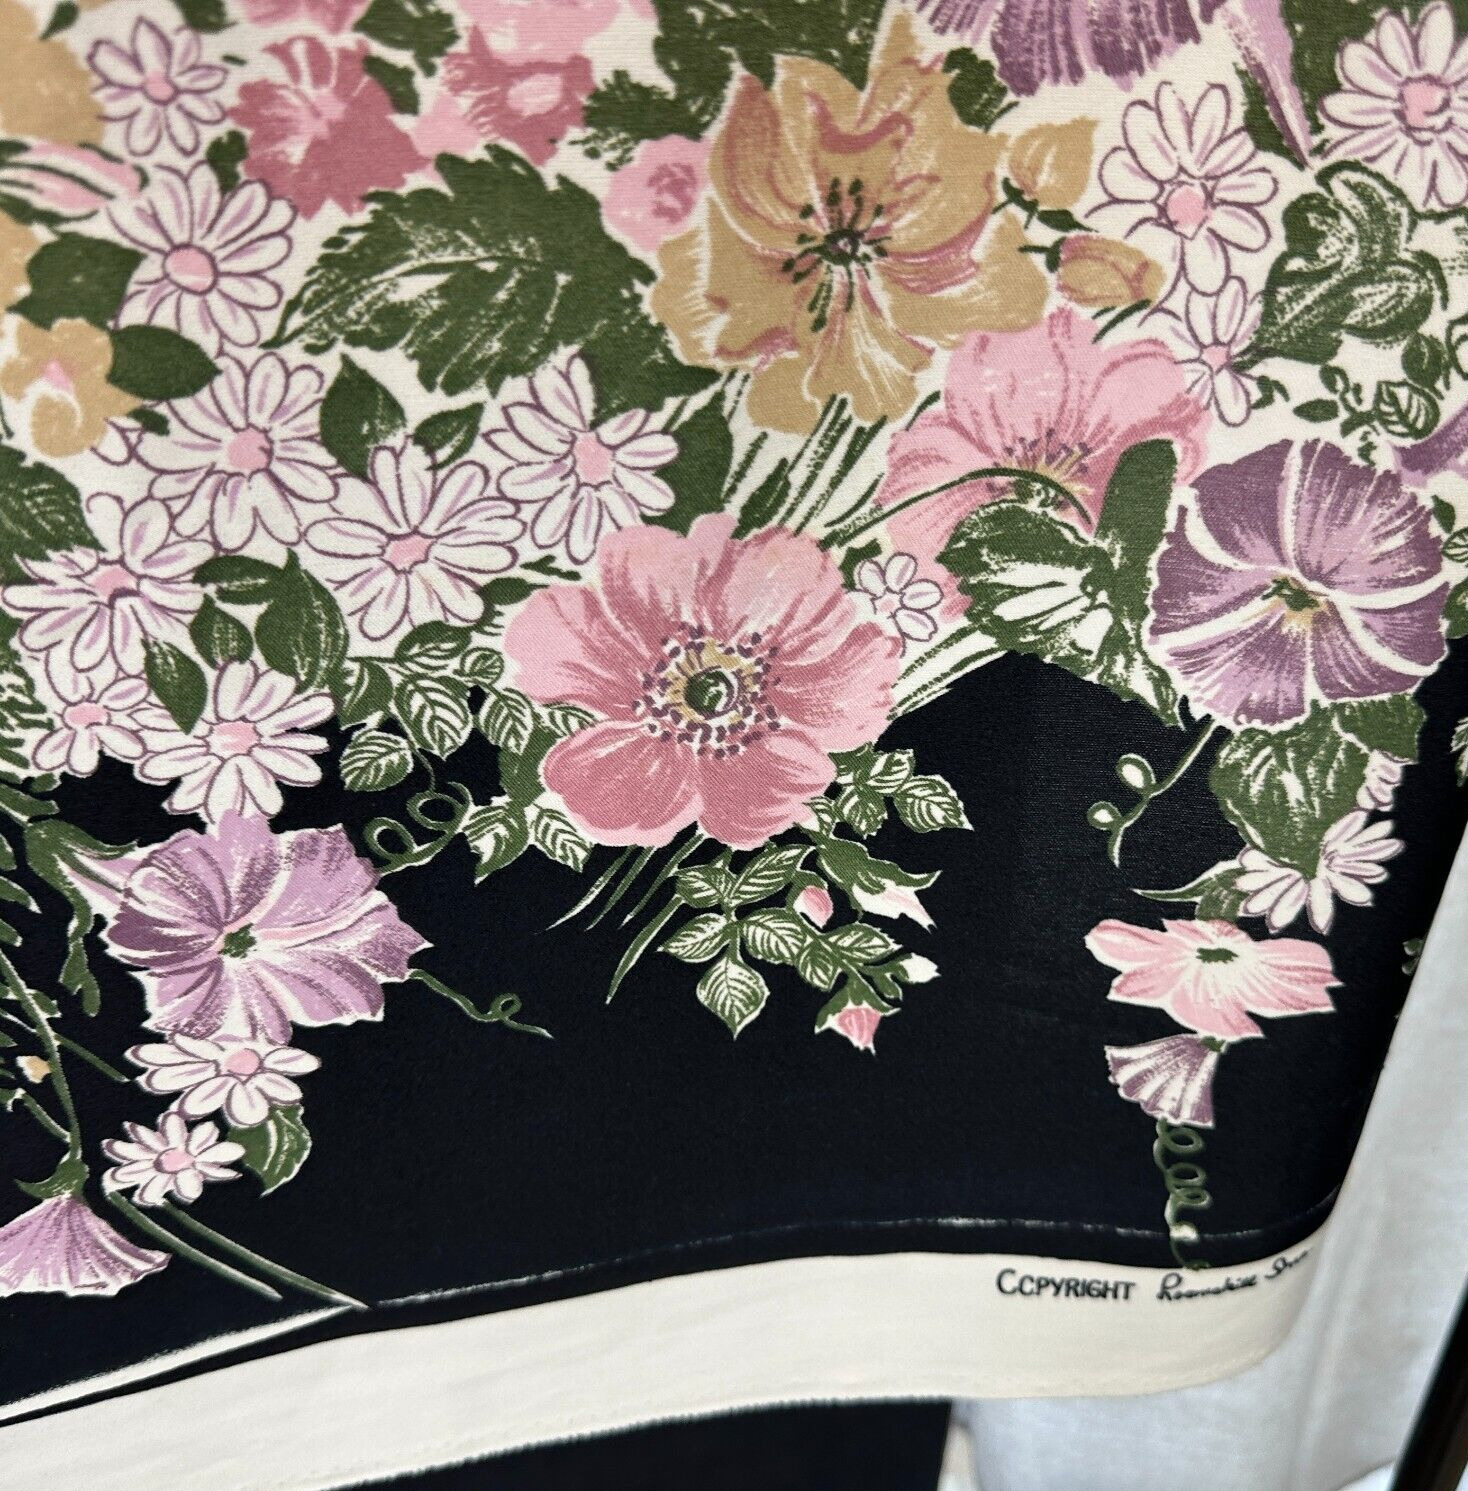 Vintage Loomskill Material Fabric 1970s Floral Bold Watercolor Pink Black Retro